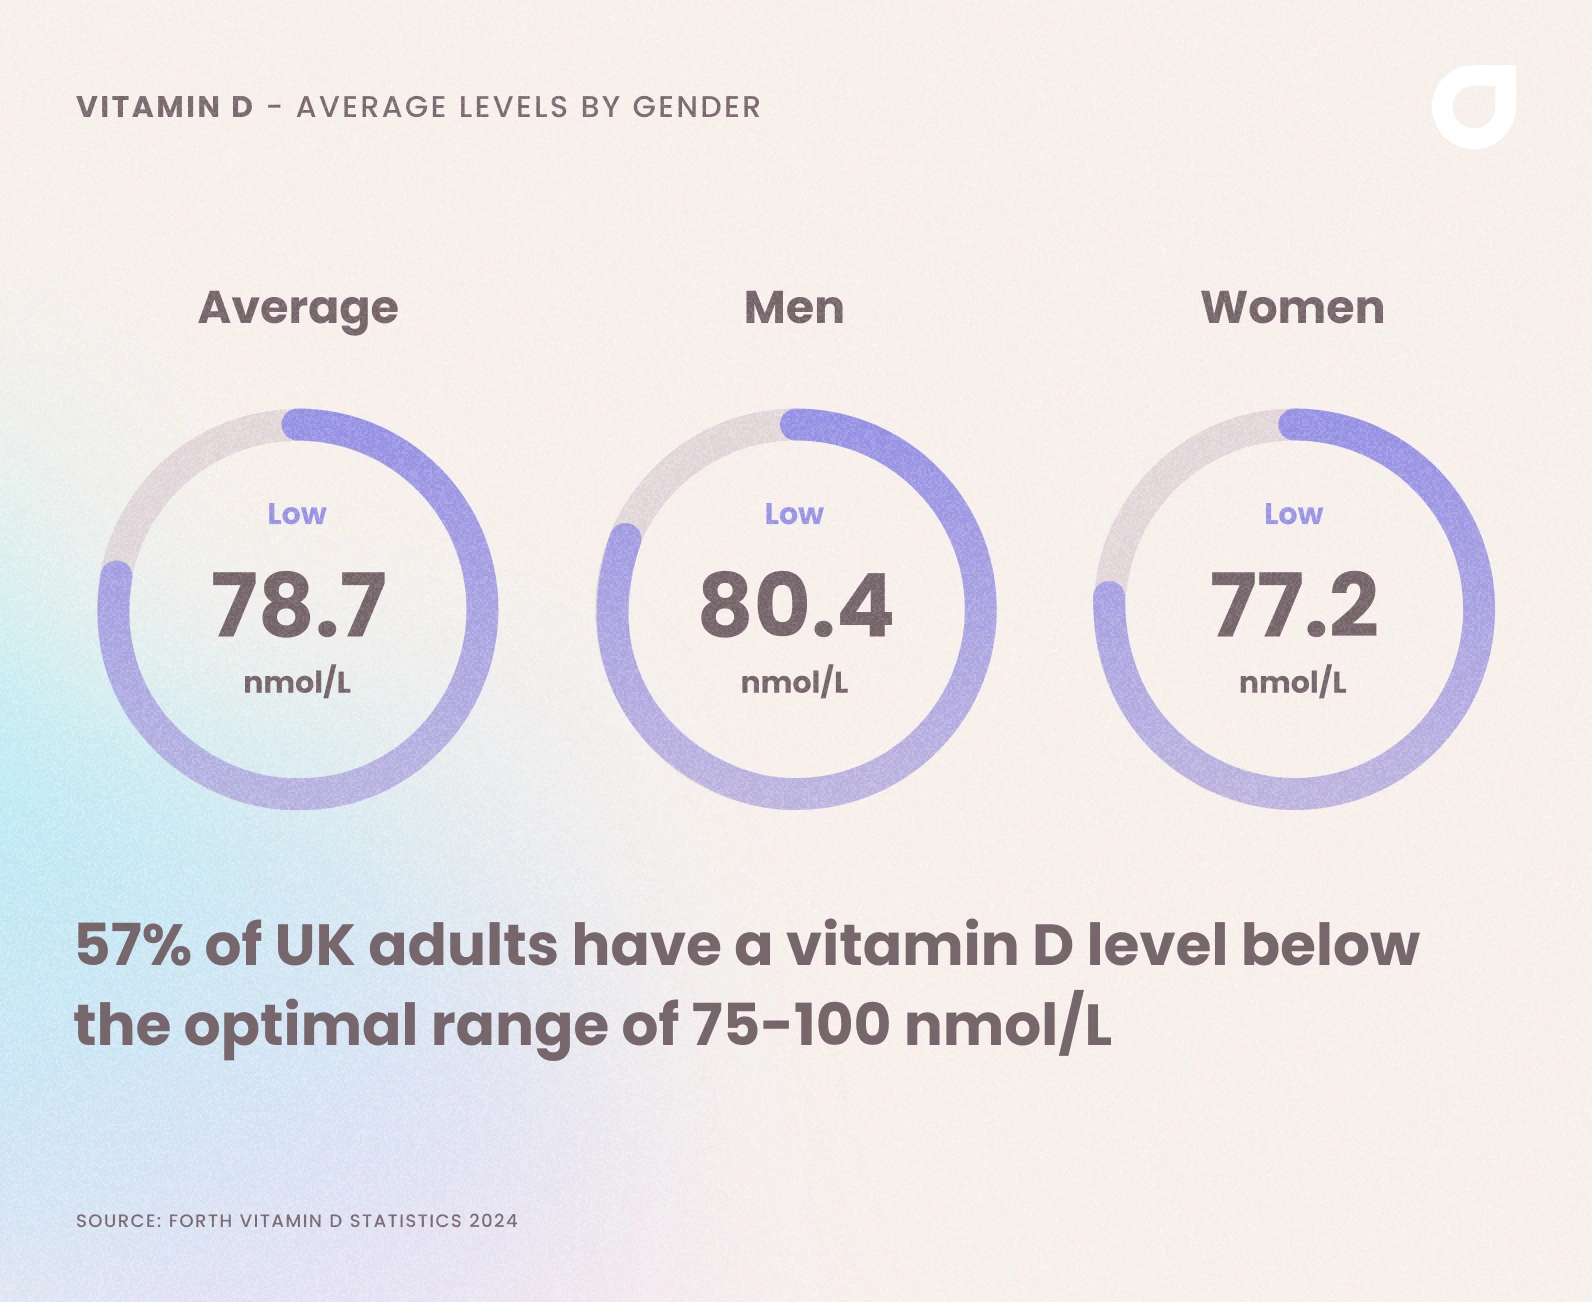 A graphic showing the average vitamin d levels for men and women in the UK, along with the overall average